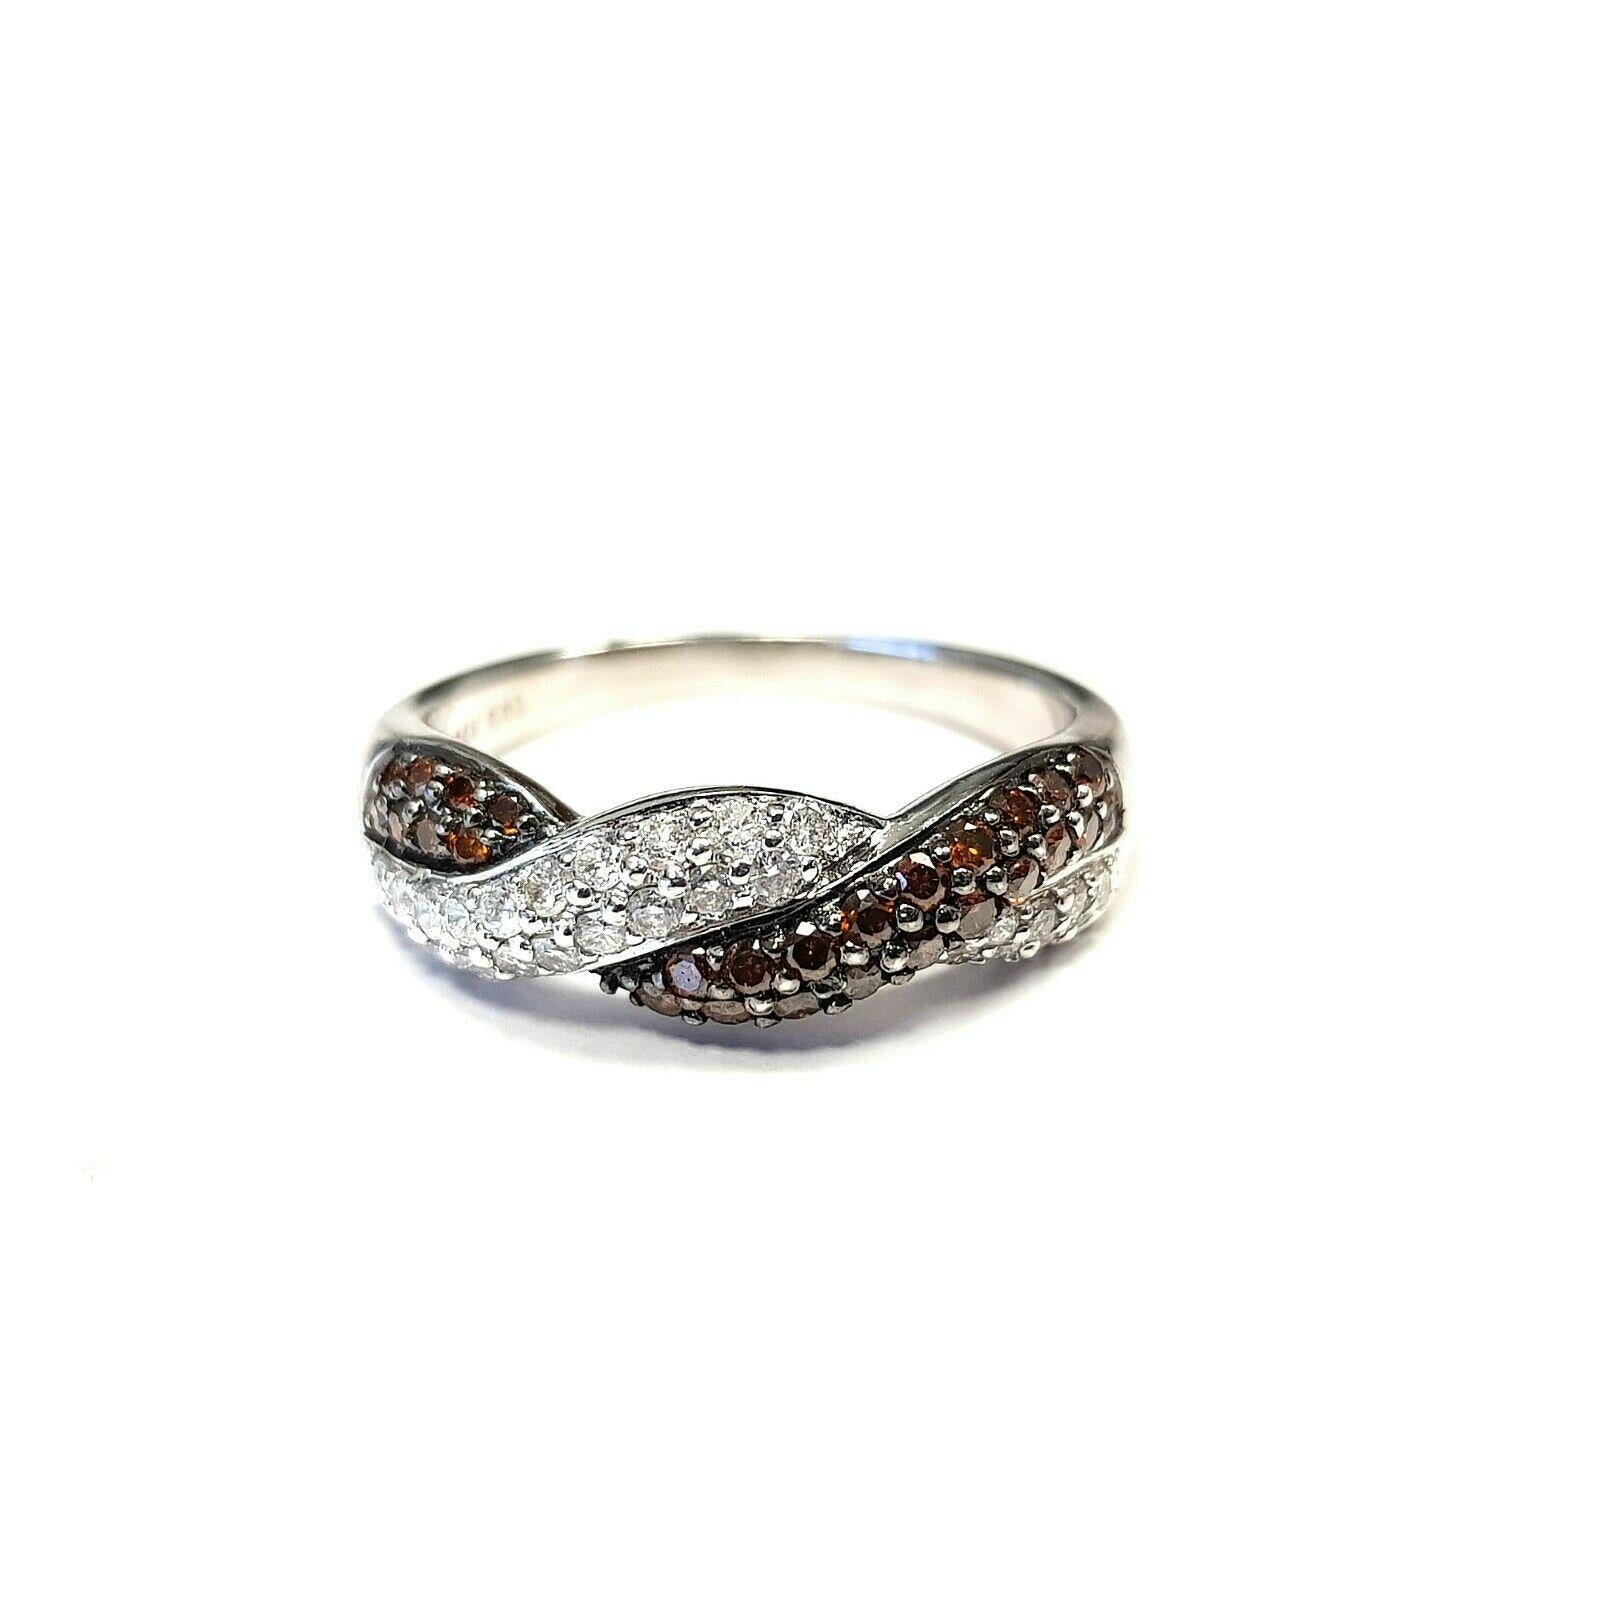 Product Details

    Metal: WHITE GOLD
    Ring measurements:
        Width: 4.30-2.68 mm
        Thickness: 1.95-1.09 mm
        Ring size: 6.75 US
        Weight: 4.04 gTW
    Hallmark: 14K 585
    Pictures are of the actual item being purchased
 